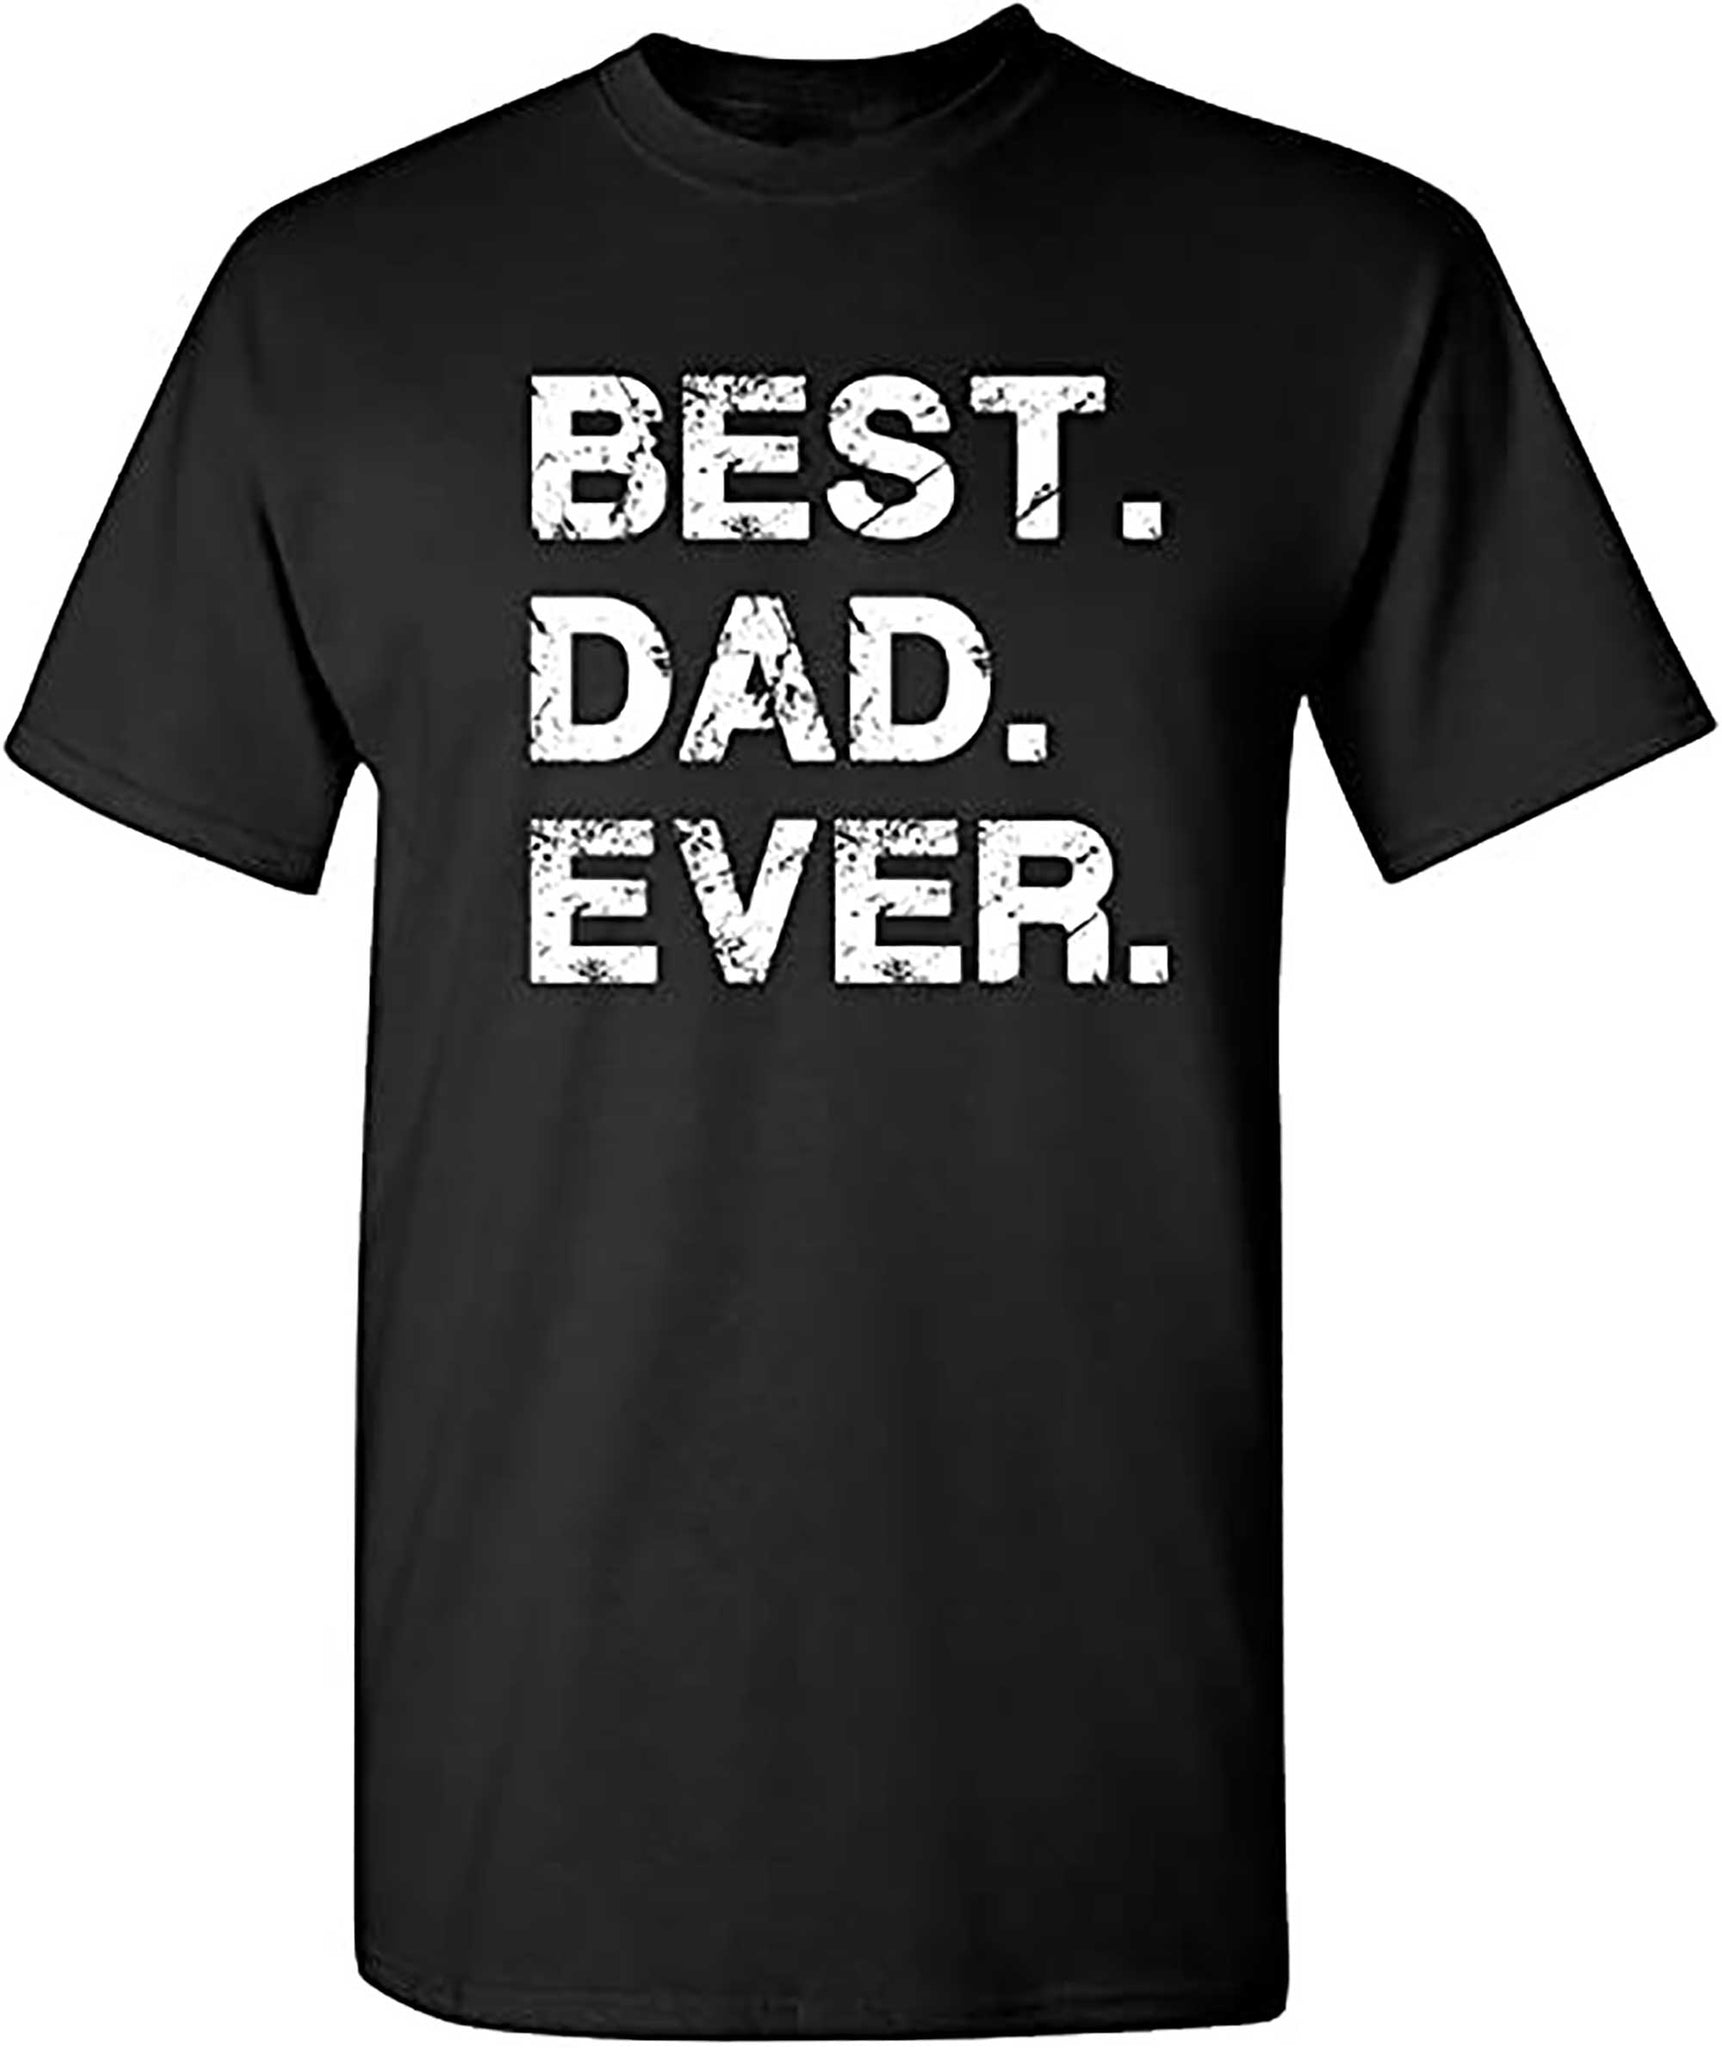 Skitongift Best Dad Ever Gift for Dad Husband Mens Funny T Shirt